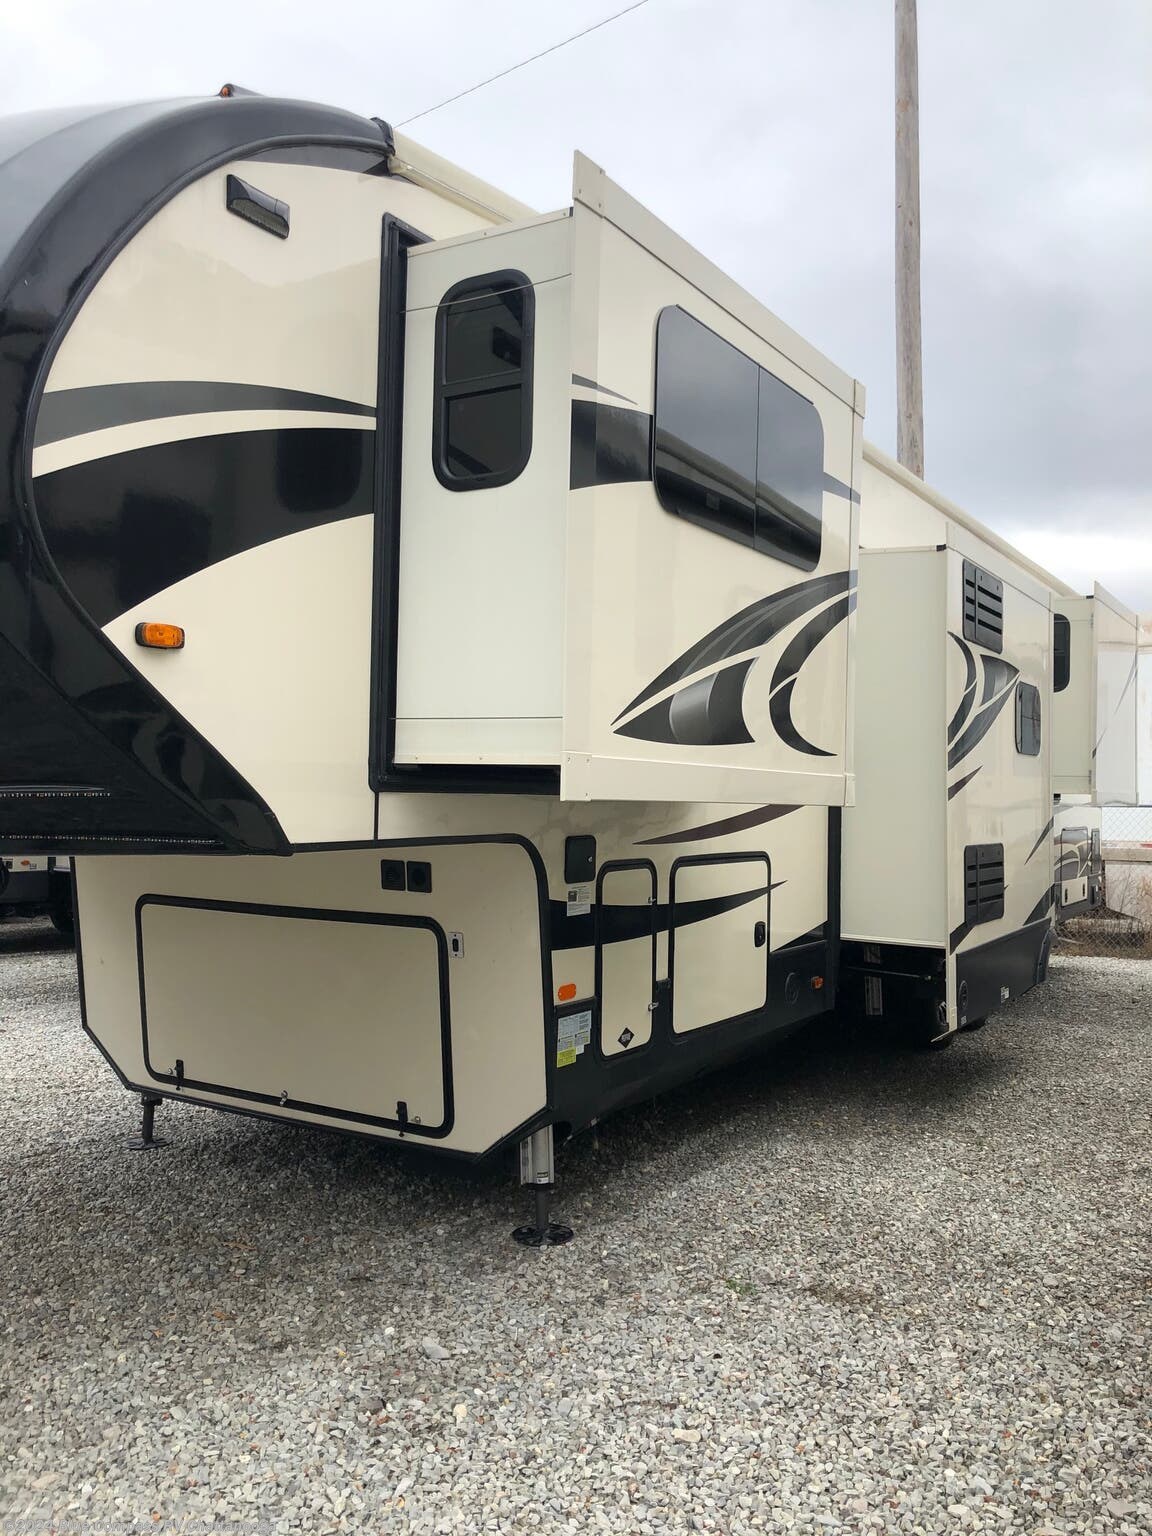 2020 Forest River RV Cardinal 3700FLX for Sale in Ringgold, GA 30736 | LG104143 | RVUSA.com 2020 Forest River Rv Cardinal Luxury 3700flx